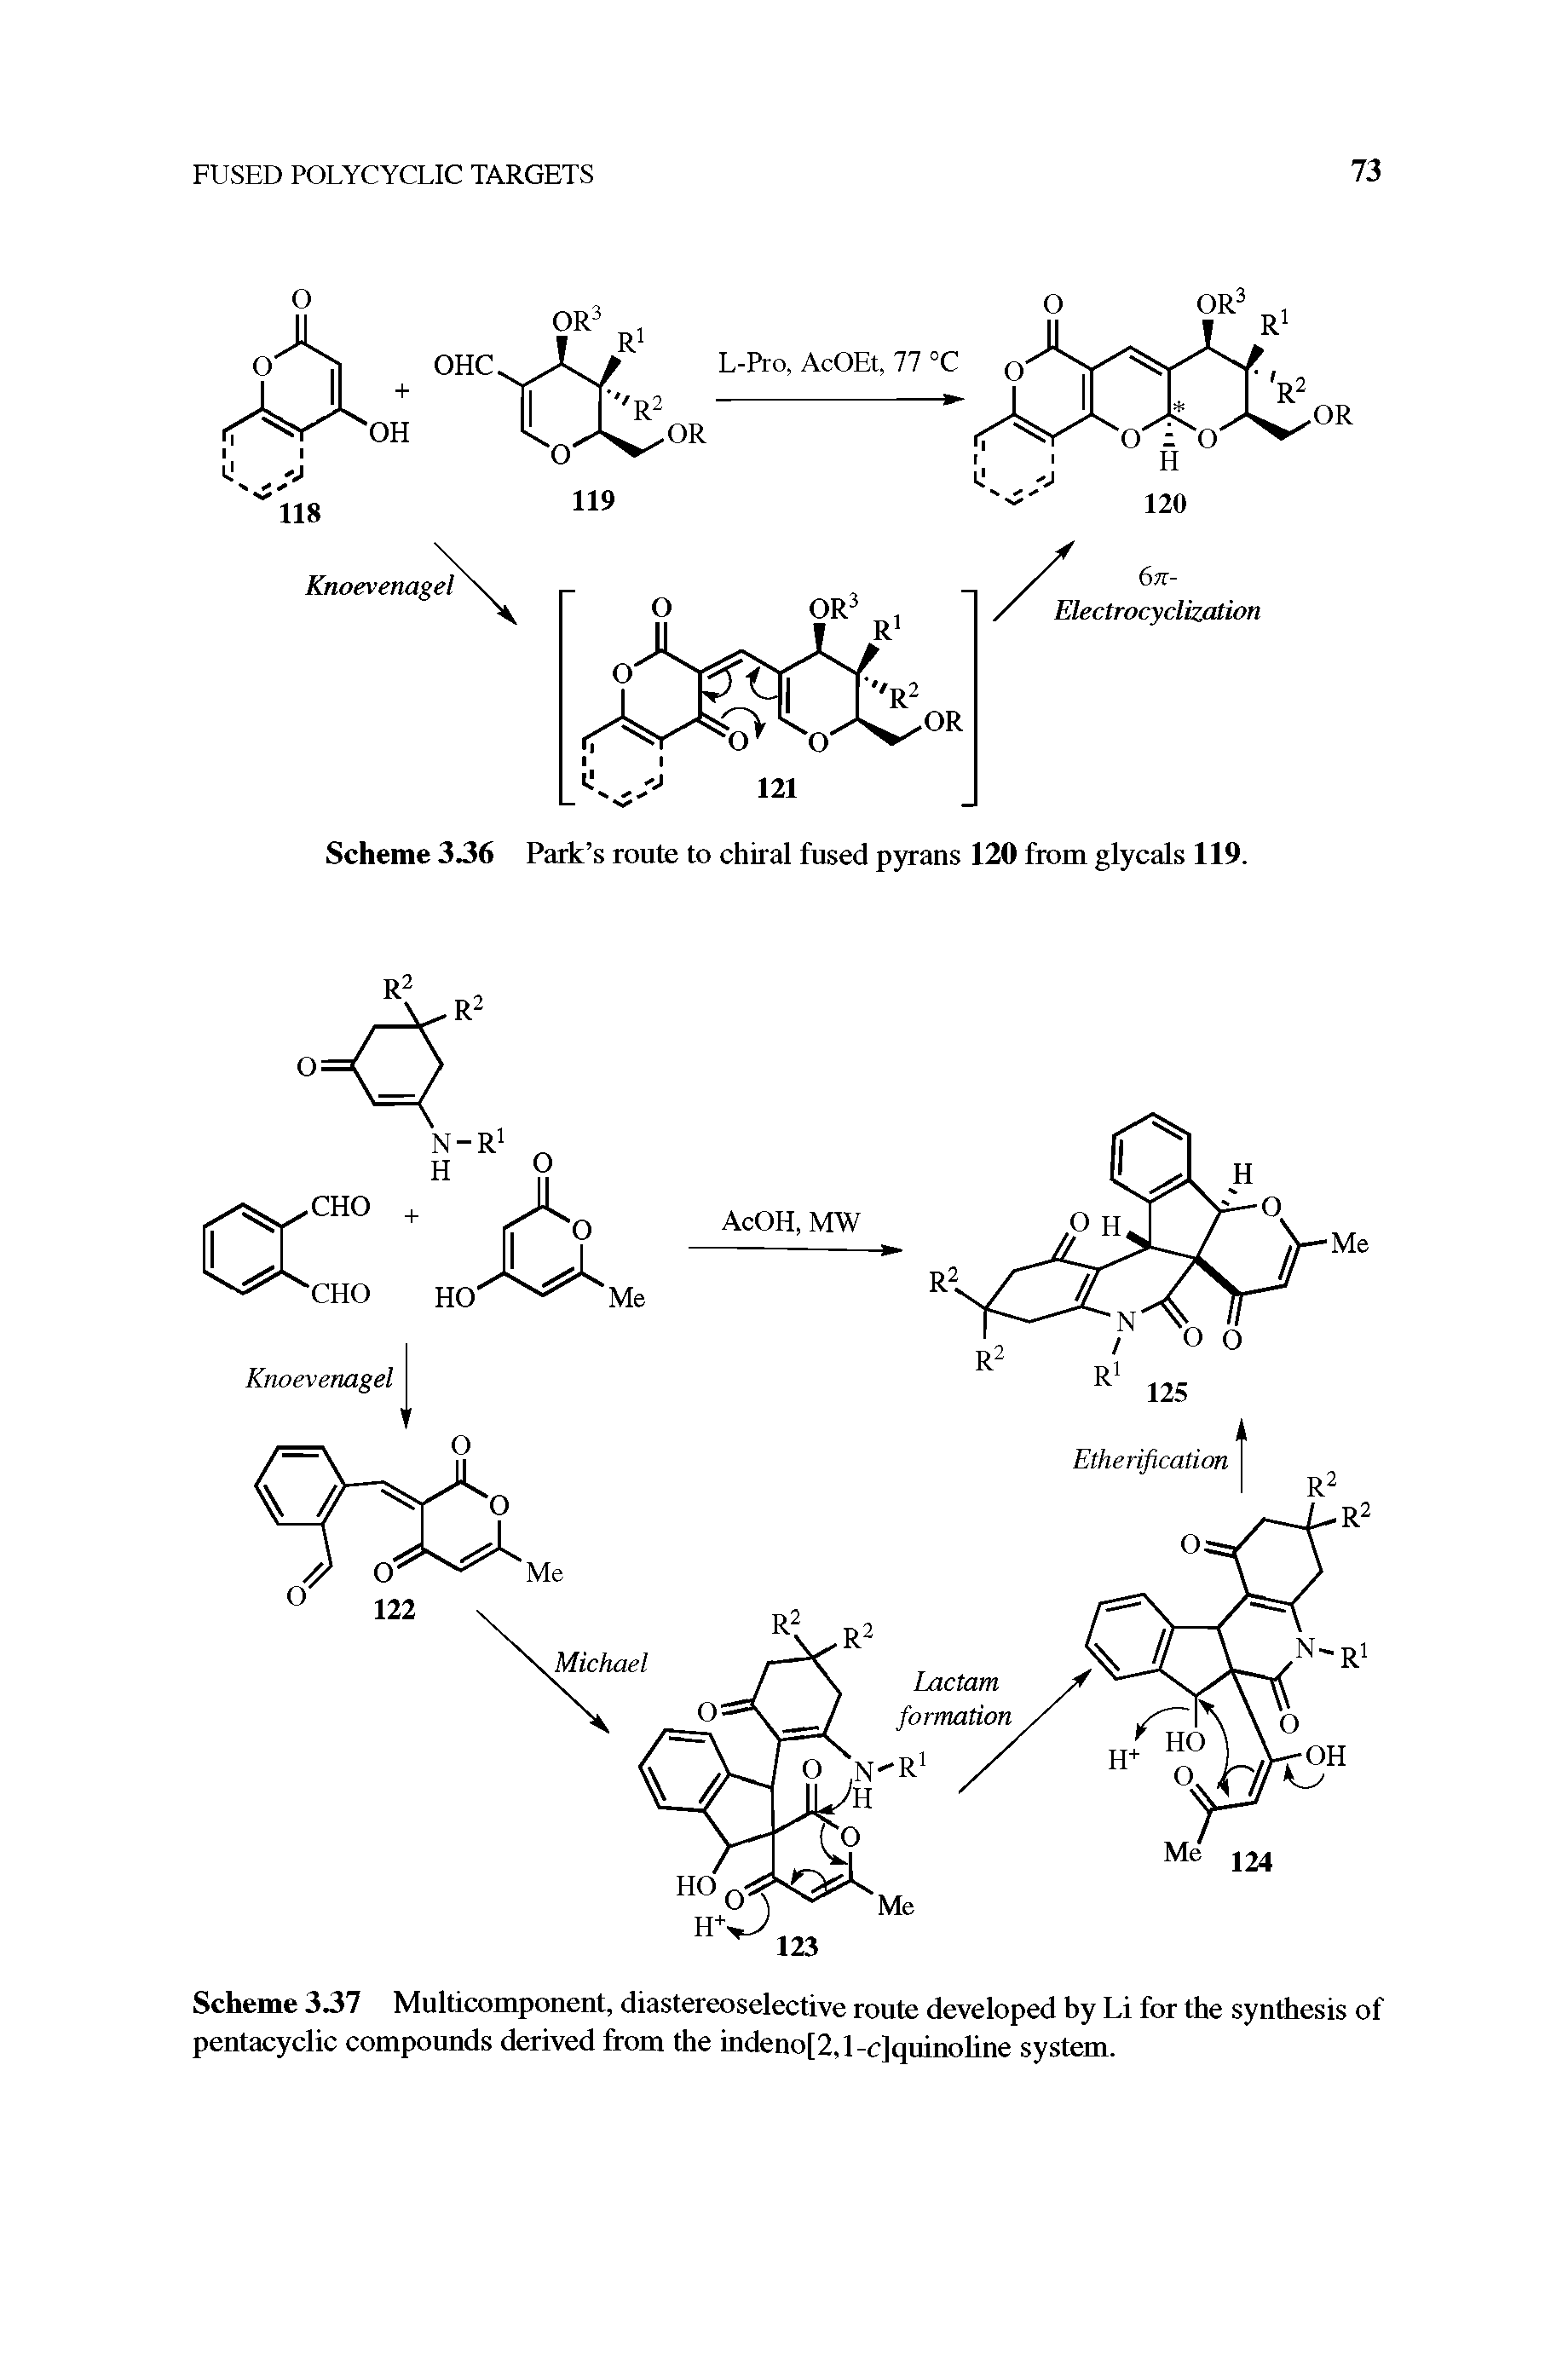 Scheme 337 Multicomponent, diastereoselective route developed by Li for the synthesis of pentacyclic compounds derived from the indeno[2,l-c]quinoline system.